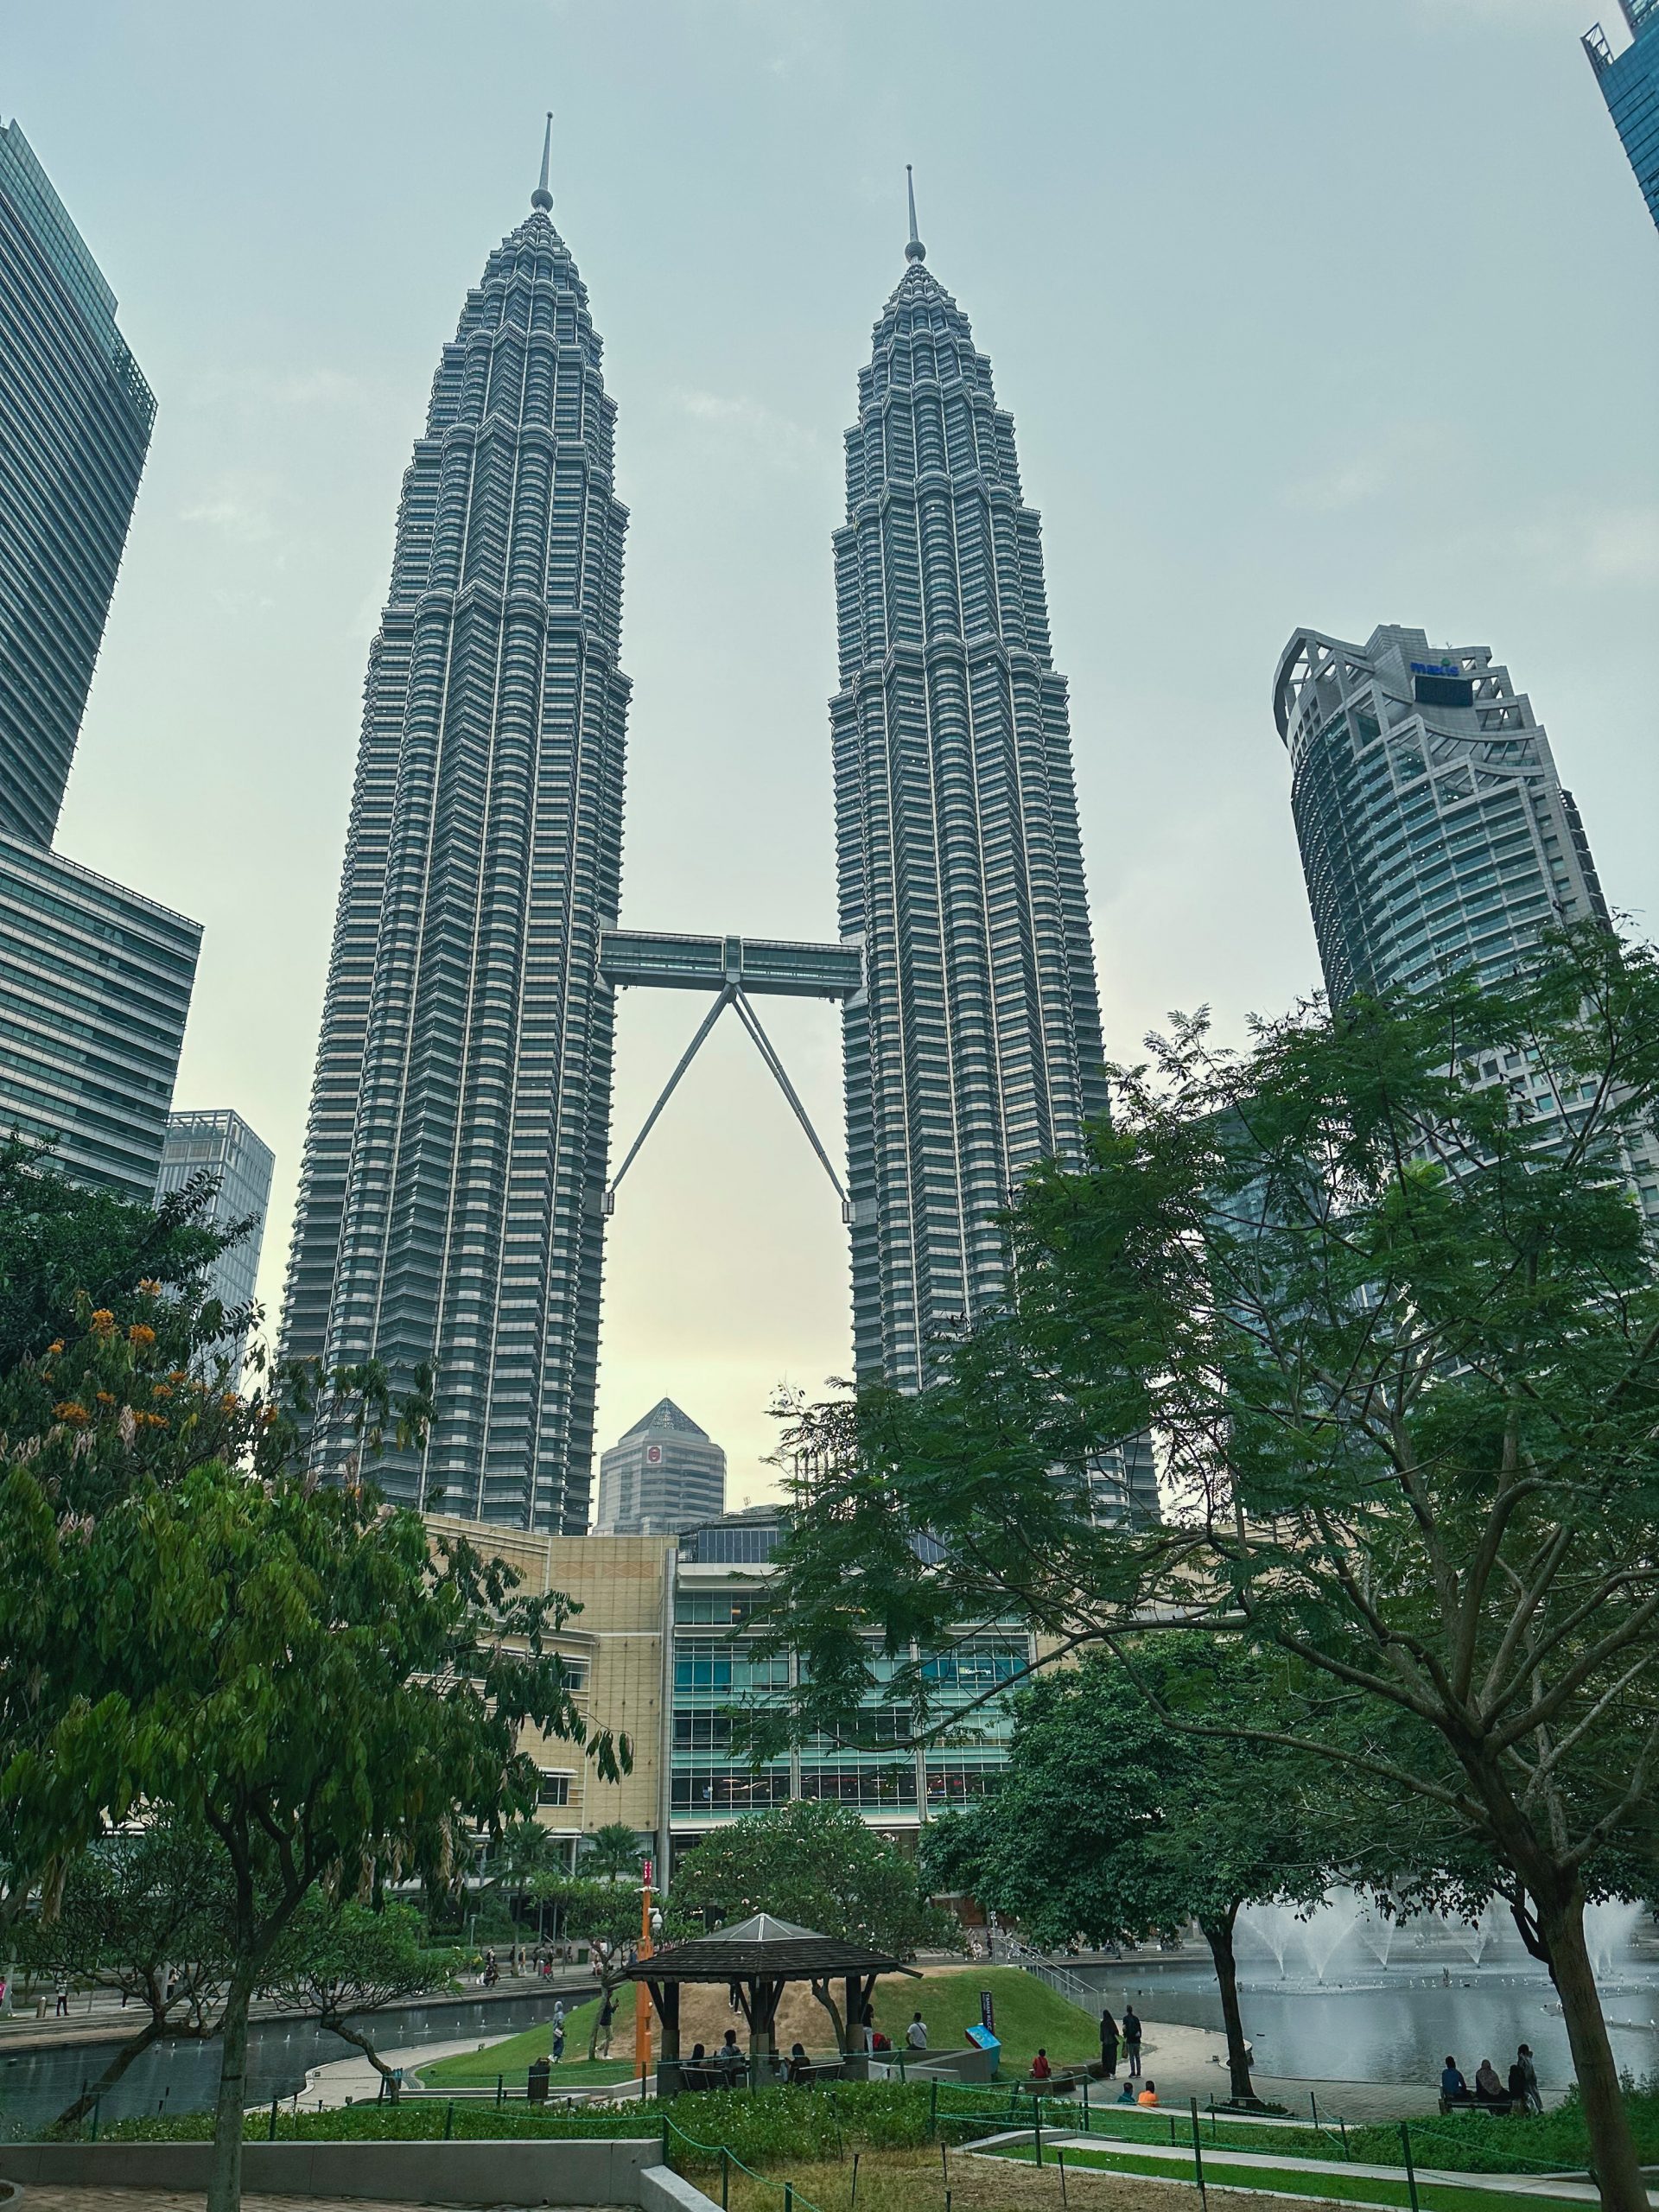 Auslandssemester in Malaysia - Twin Towers